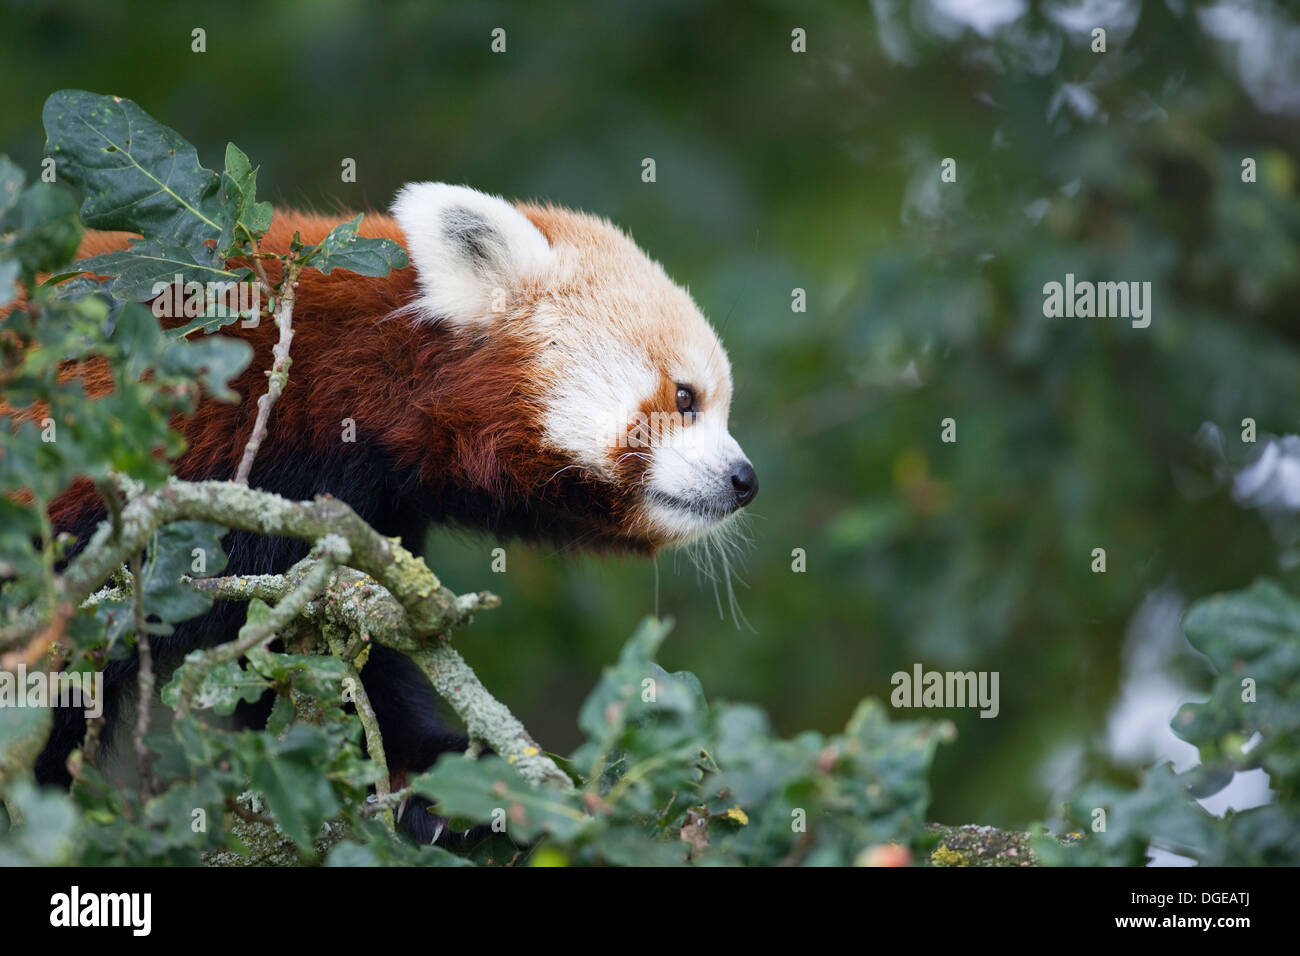 Red or Lesser Panda (Ailurius fulgens). Looking across from one tree branch to another gauging distance. Pandas have difficulty Stock Photo